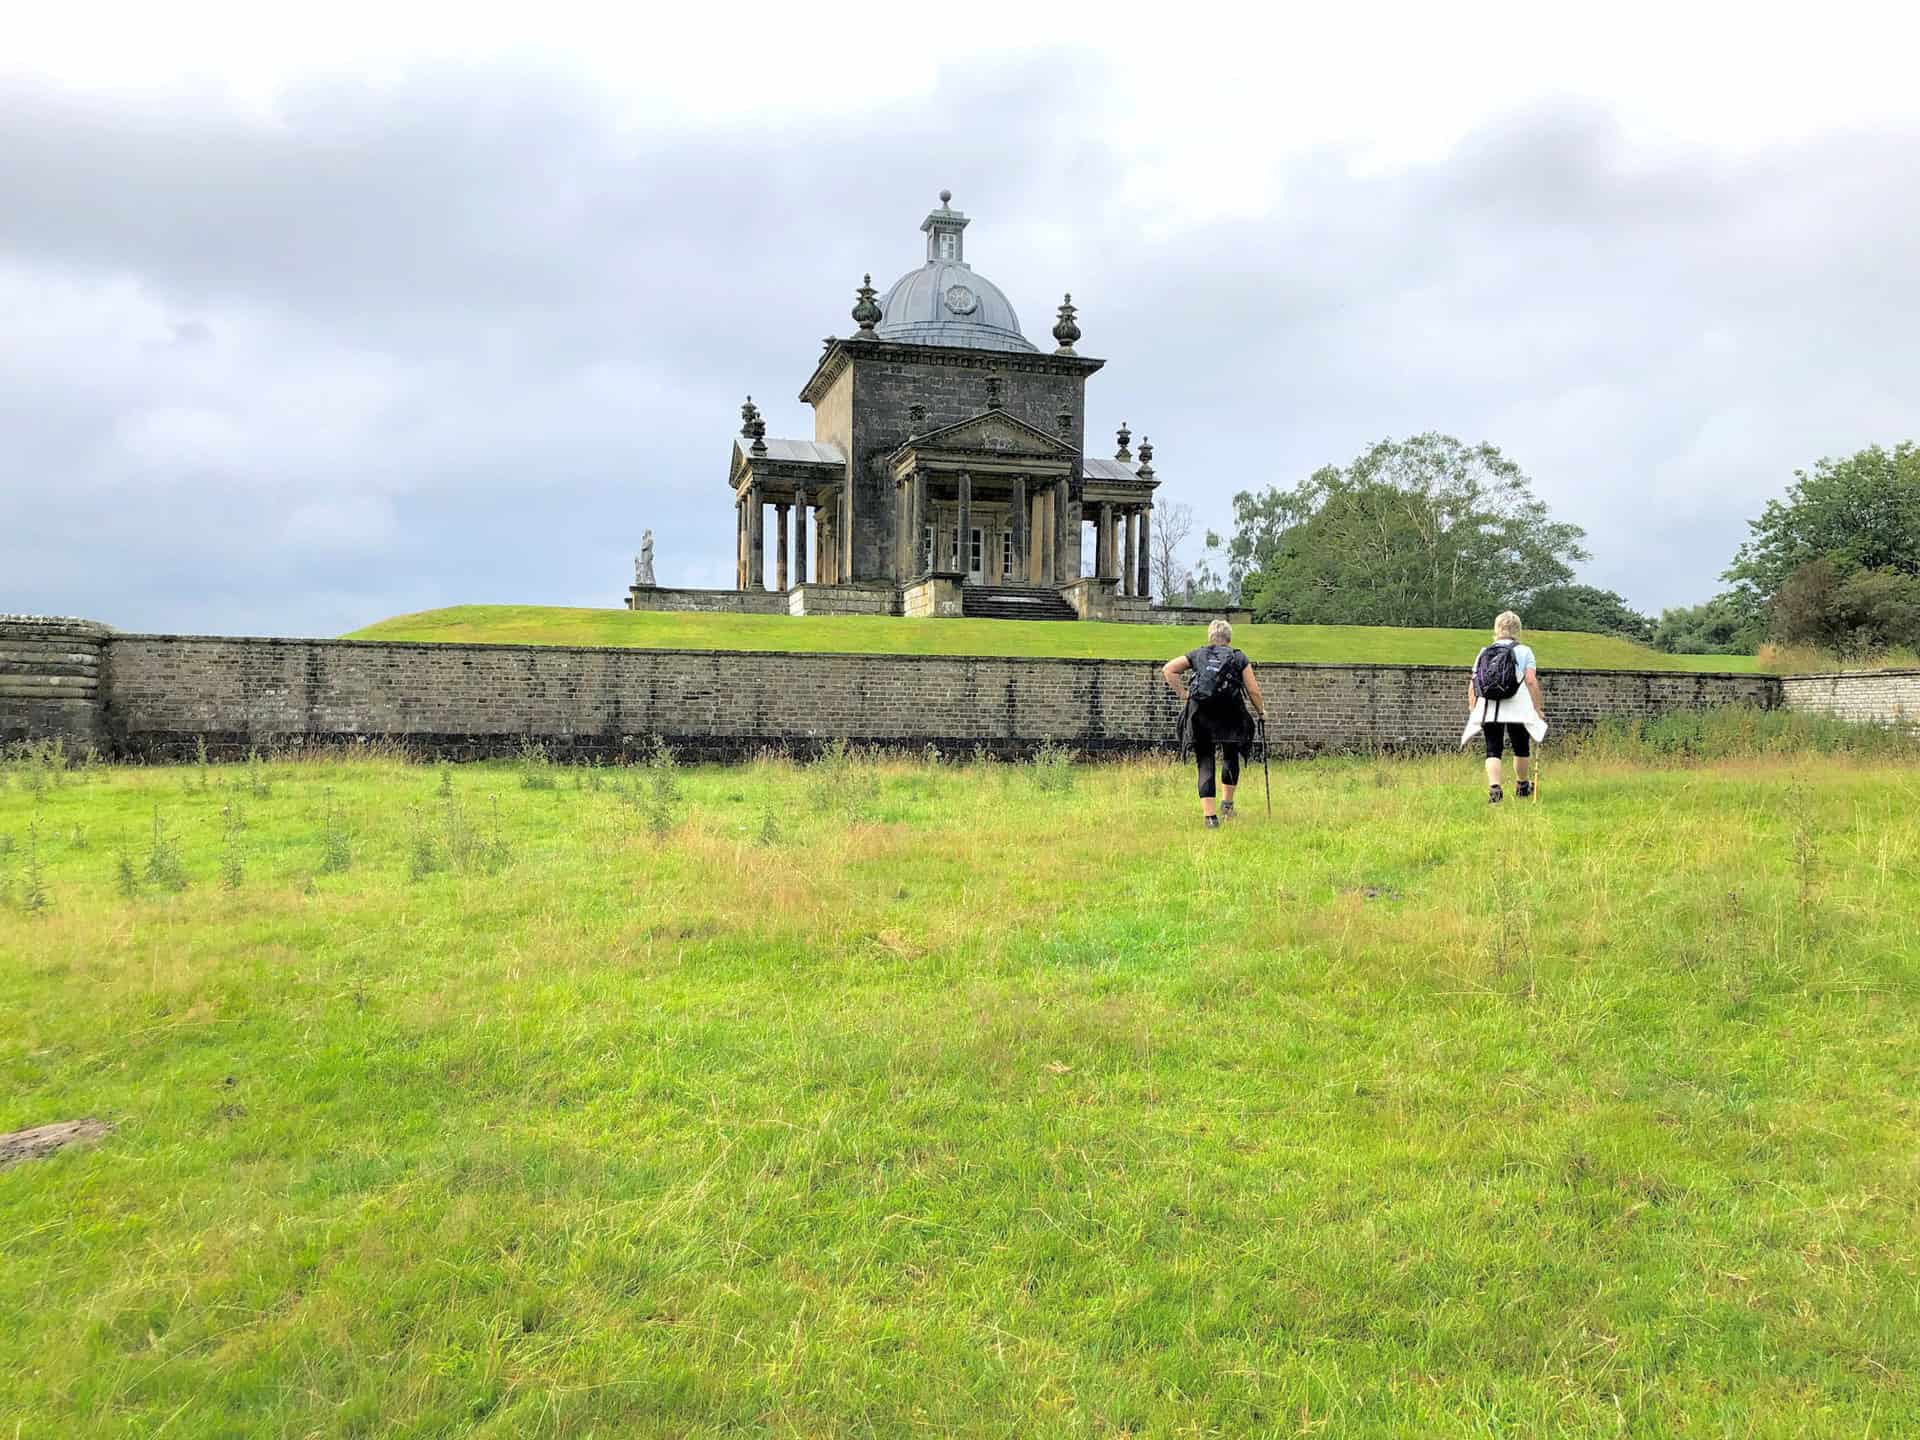 The Temple of the Four Winds lies at the eastern end of Temple Terrace, seen during the Castle Howard walk.